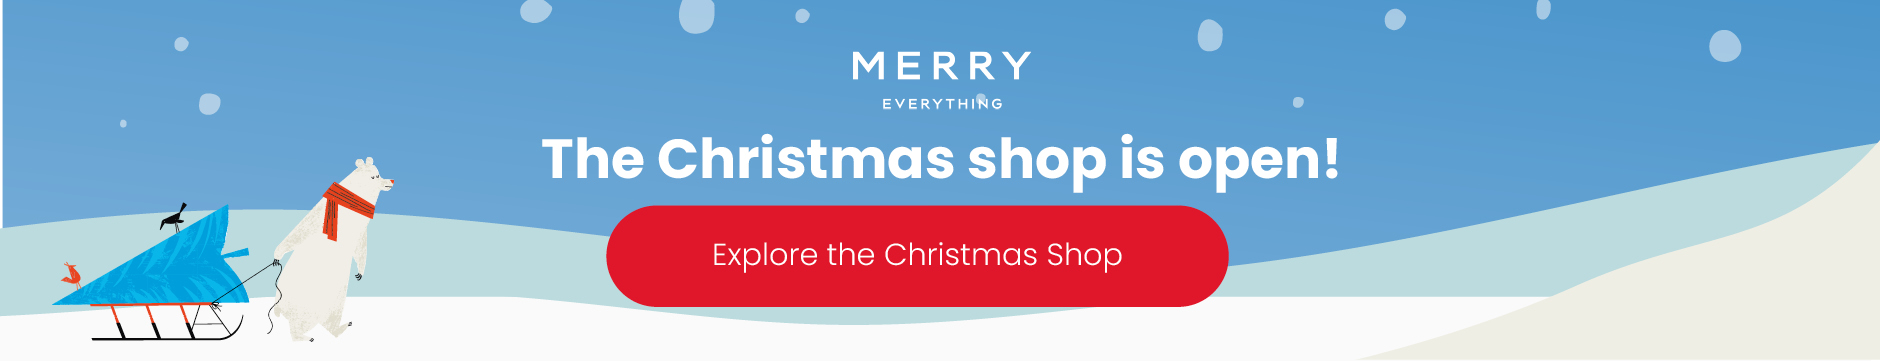 Christmas Shop is Open HP Banner-English